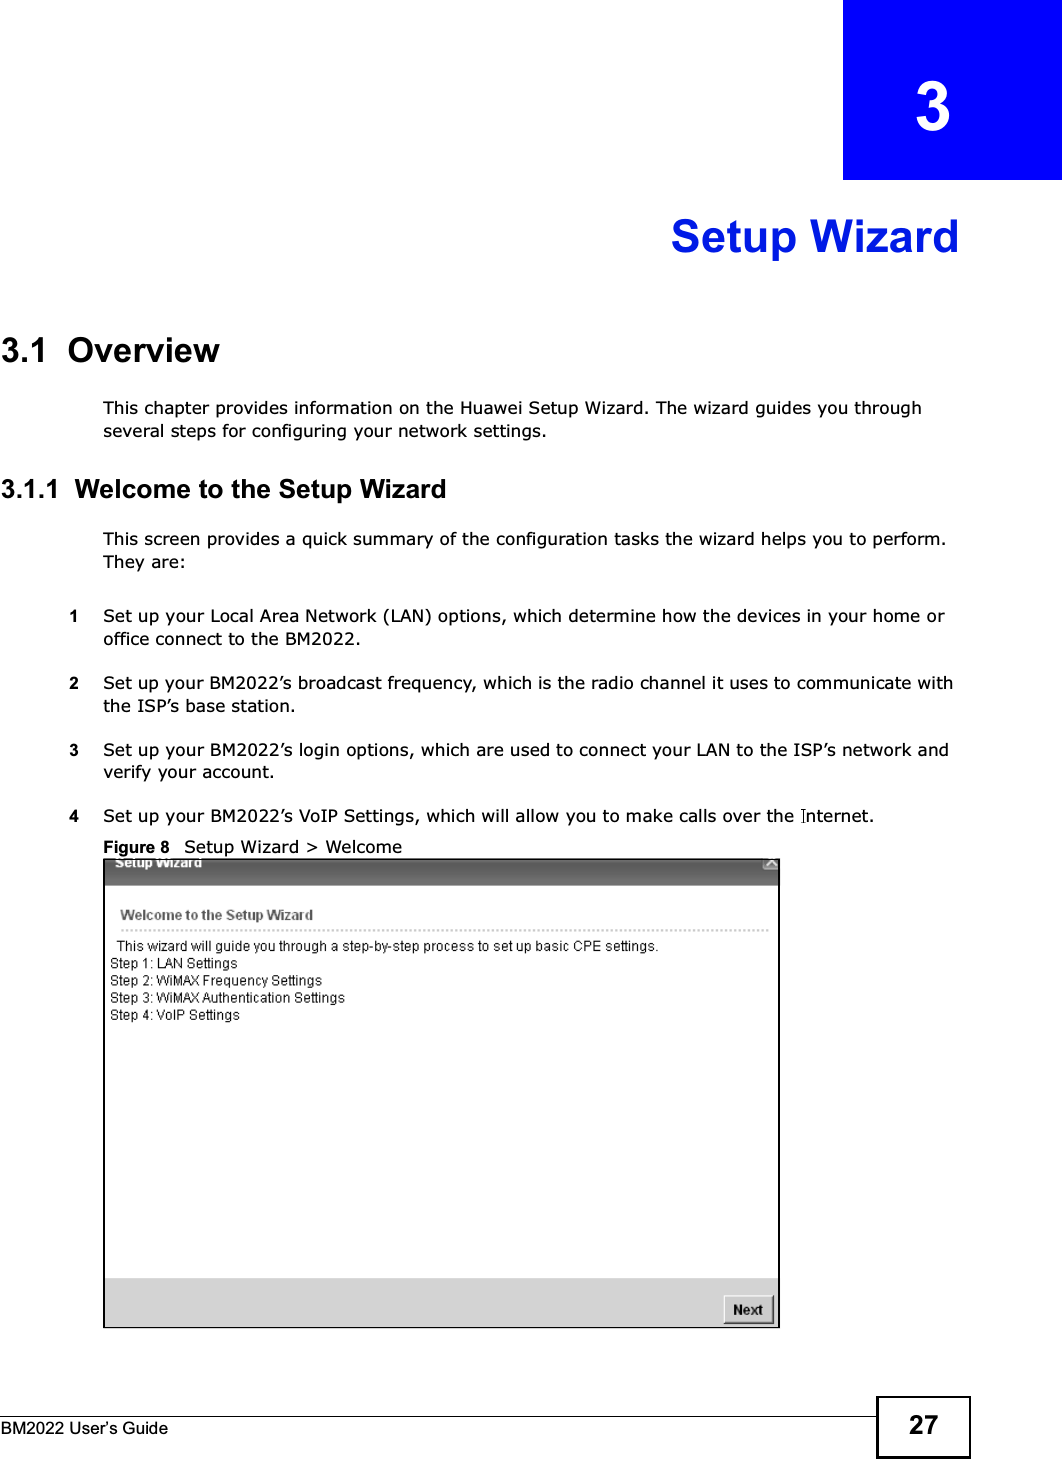 BM2022 Users Guide 27CHAPTER   3Setup Wizard3.1  OverviewThis chapter provides information on the Huawei Setup Wizard. The wizard guides you through several steps for configuring your network settings.3.1.1  Welcome to the Setup WizardThis screen provides a quick summary of the configuration tasks the wizard helps you to perform. They are:1Set up your Local Area Network (LAN) options, which determine how the devices in your home or office connect to the BM2022.2Set up your BM2022s broadcast frequency, which is the radio channel it uses to communicate with the ISPs base station.3Set up your BM2022s login options, which are used to connect your LAN to the ISPs network and verify your account. 4Set up your BM2022s VoIP Settings, which will allow you to make calls over the  nternet.Figure 8   Setup Wizard &gt; Welcome